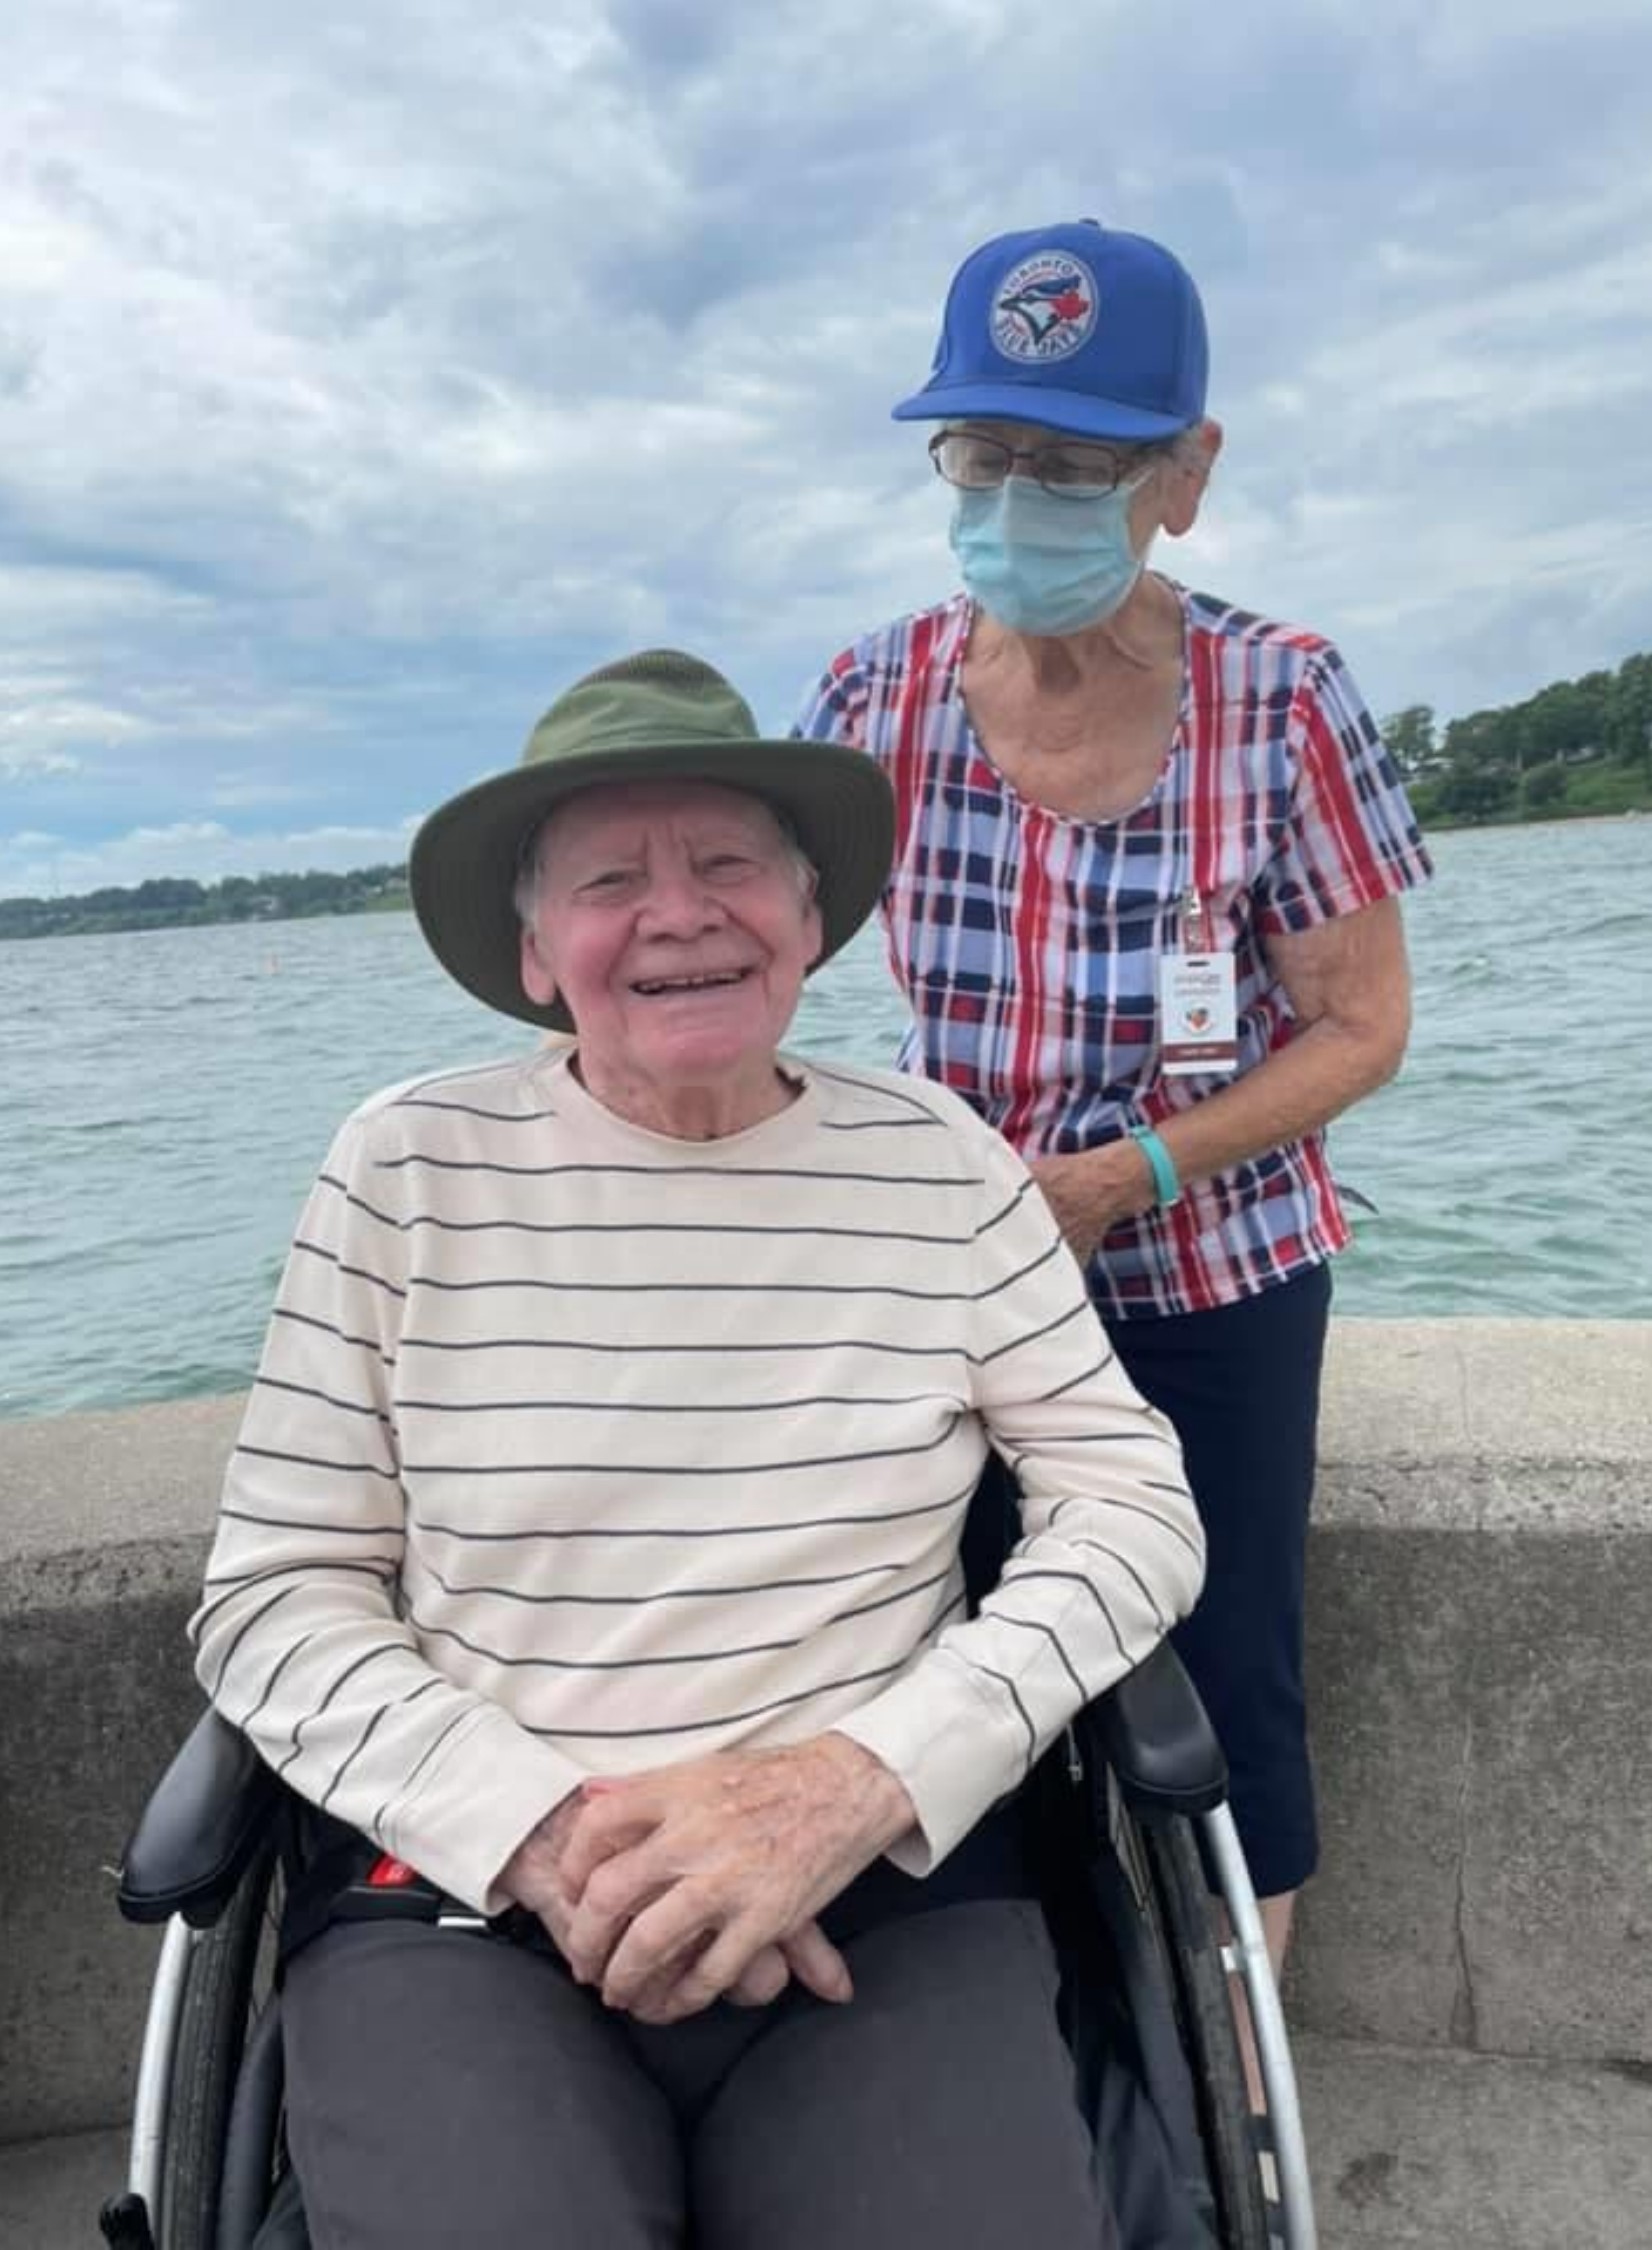 peopleCare LTC resident and designated family caregiver posing for a photo next to the lake